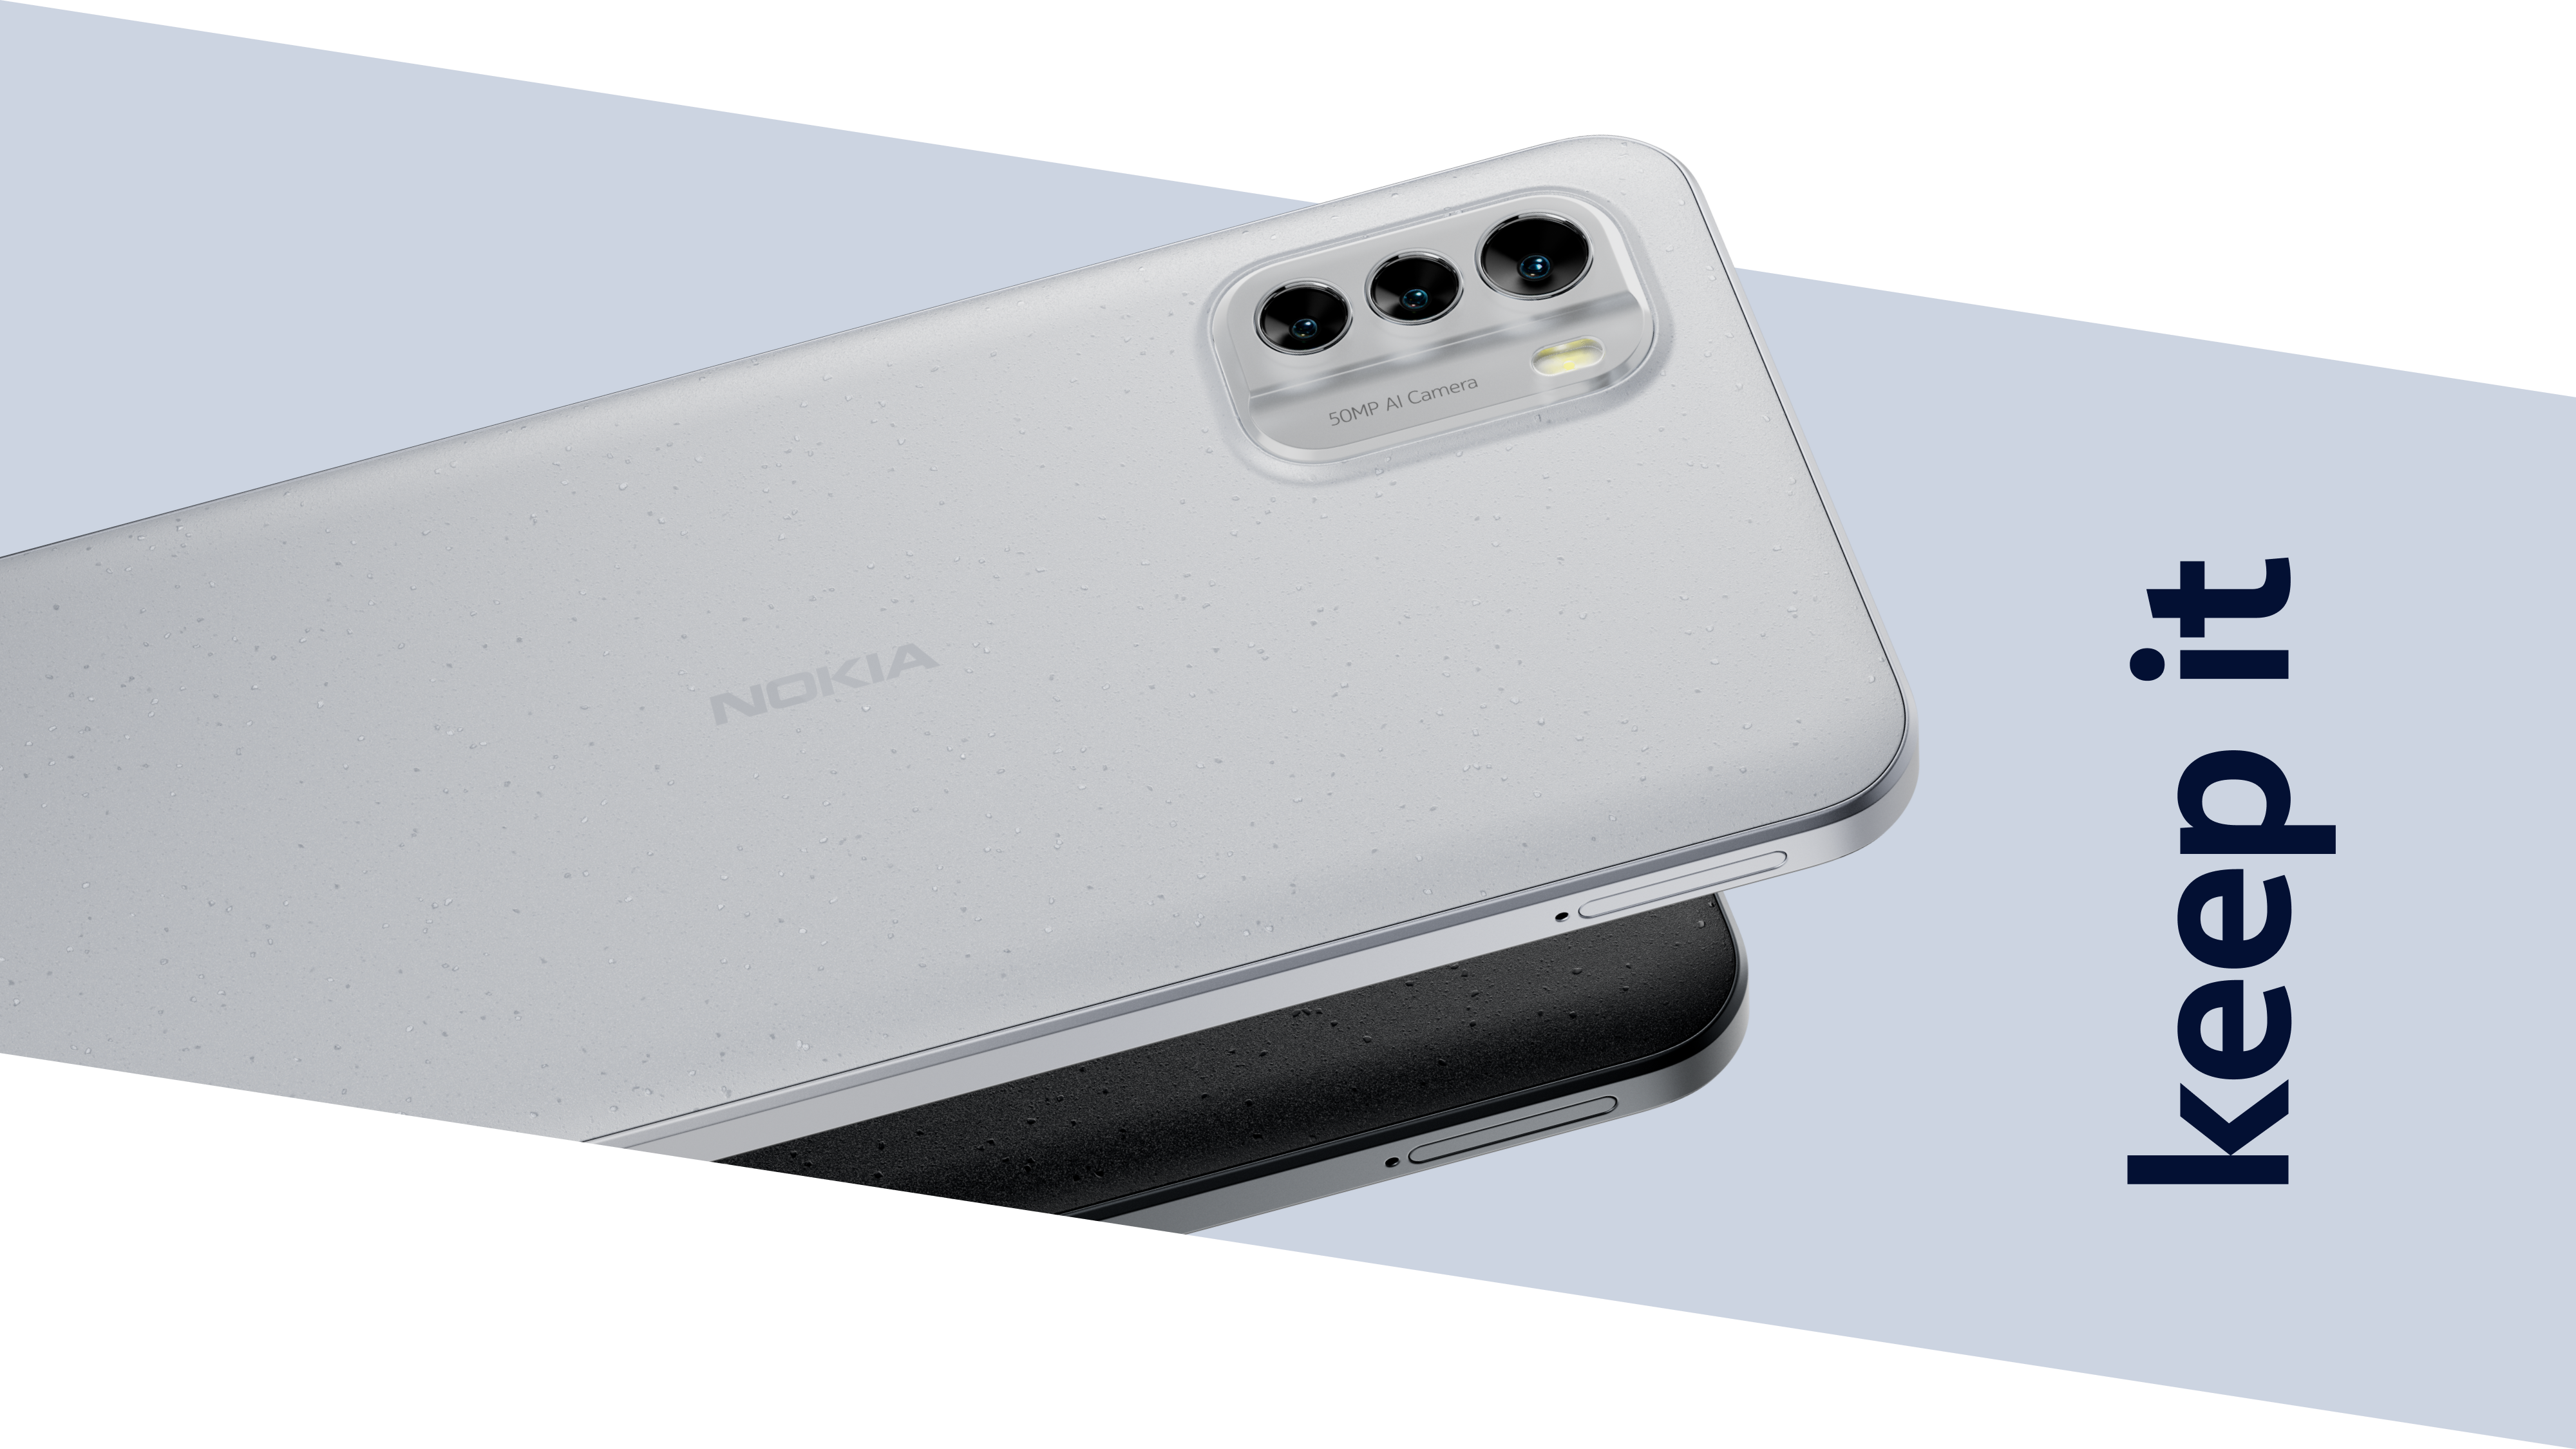 Nokia G60 5G smartphone camera with triple MP 50